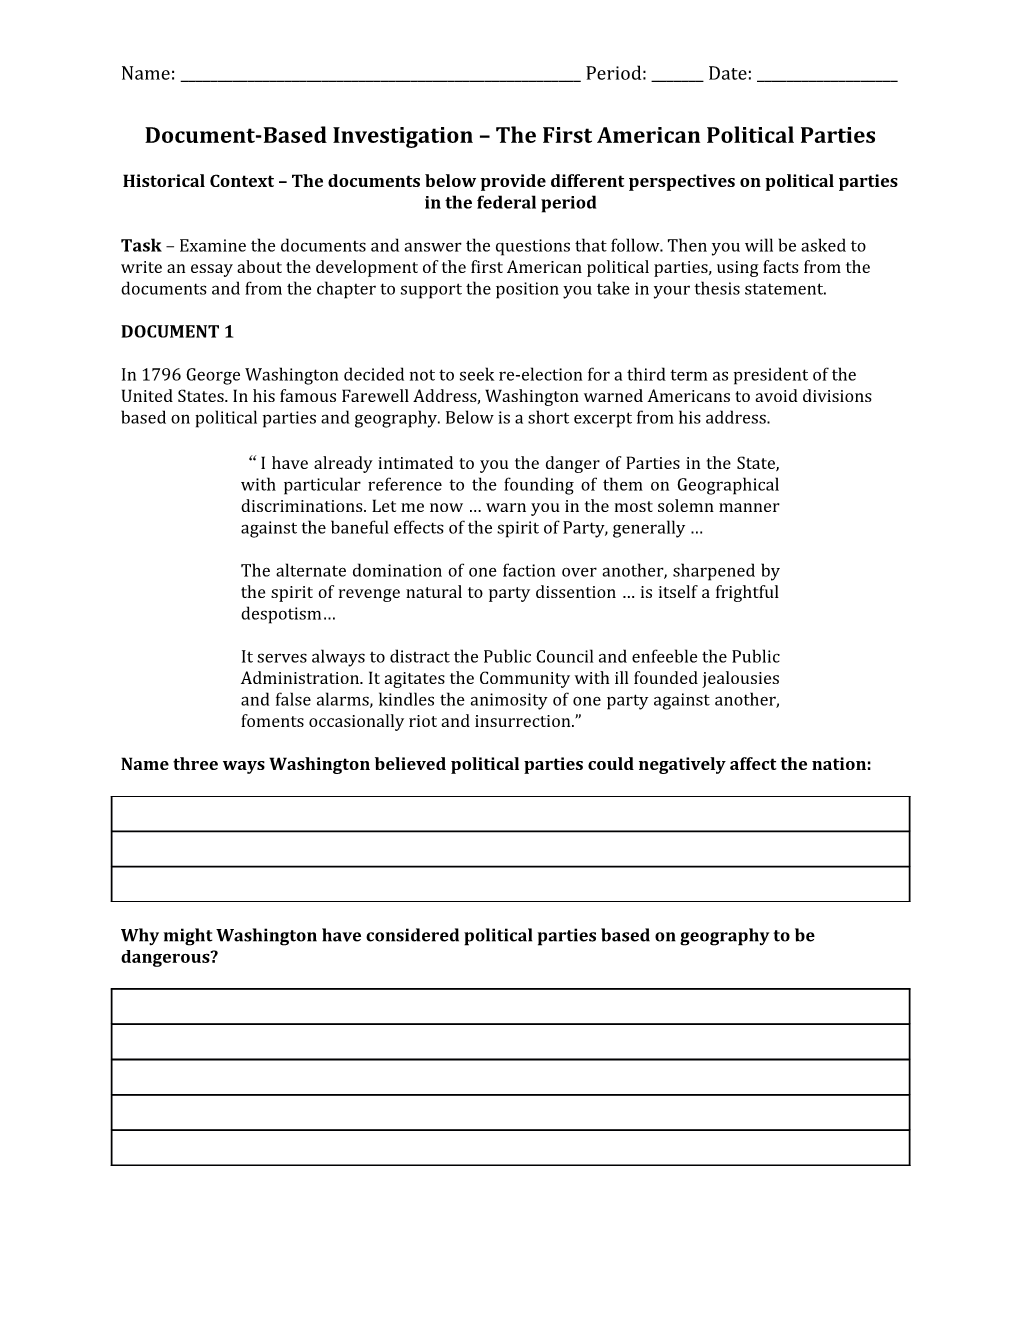 Document-Based Investigation the First American Political Parties